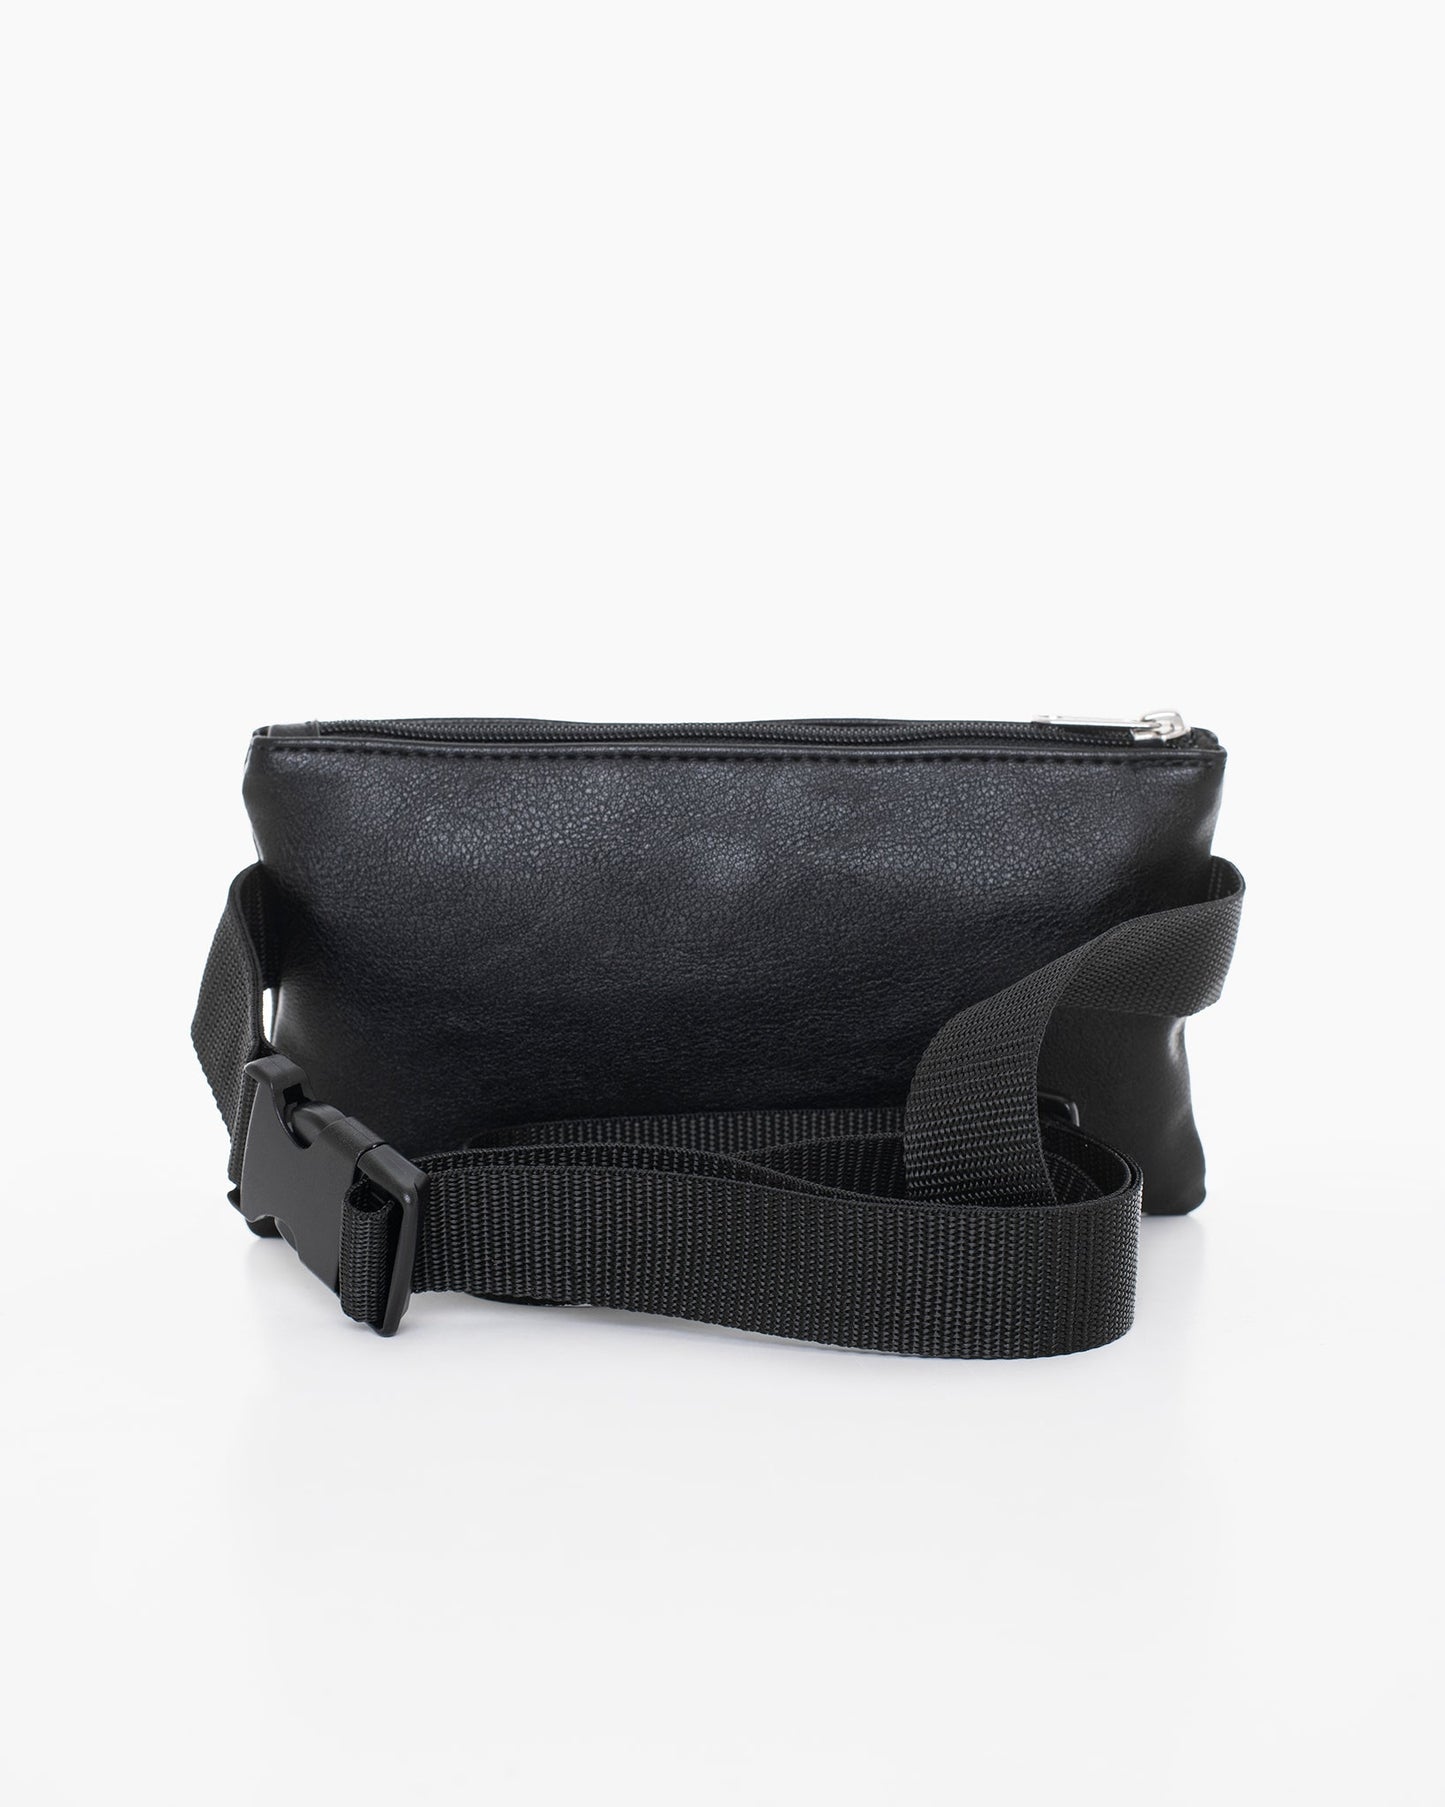 A Finnish Nabo waist bag in black, featuring multiple zipped pockets, made from recycled polyester. Dimensions: 22 x 12 x 1 cm.